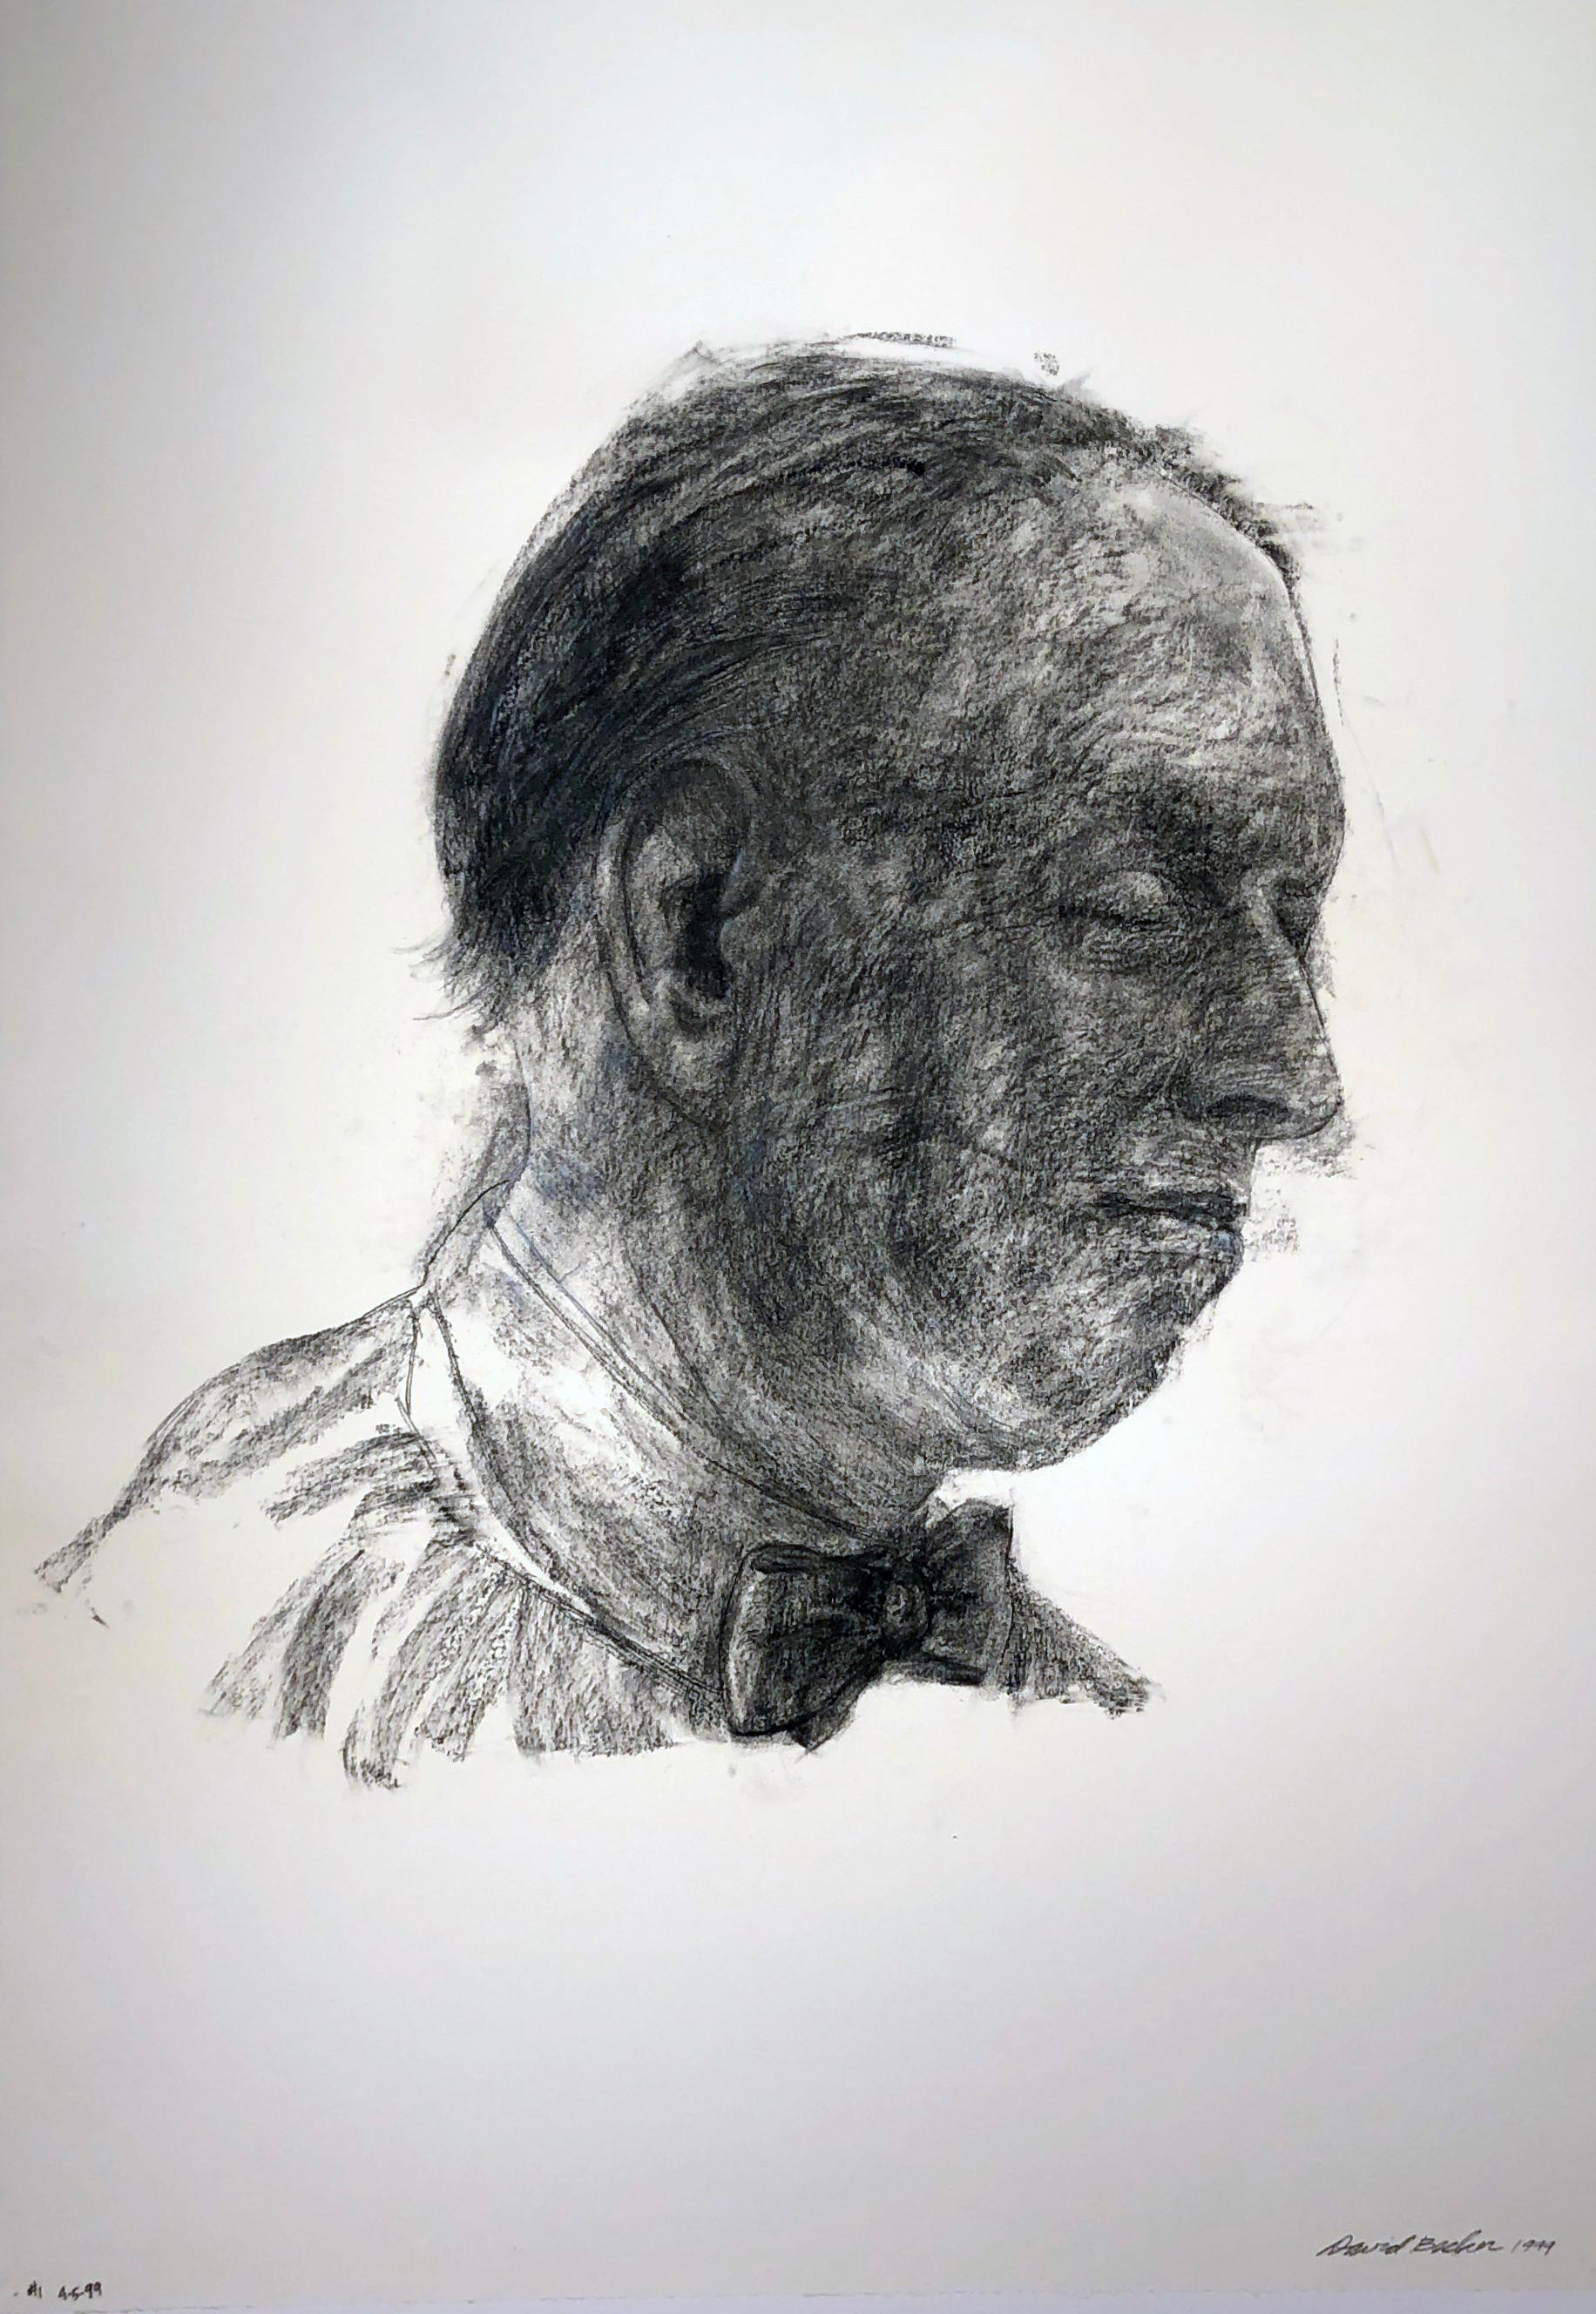 Reflection #1, Charcoal Drawing of a Man Gazing Down, Wearing a Bow Tie